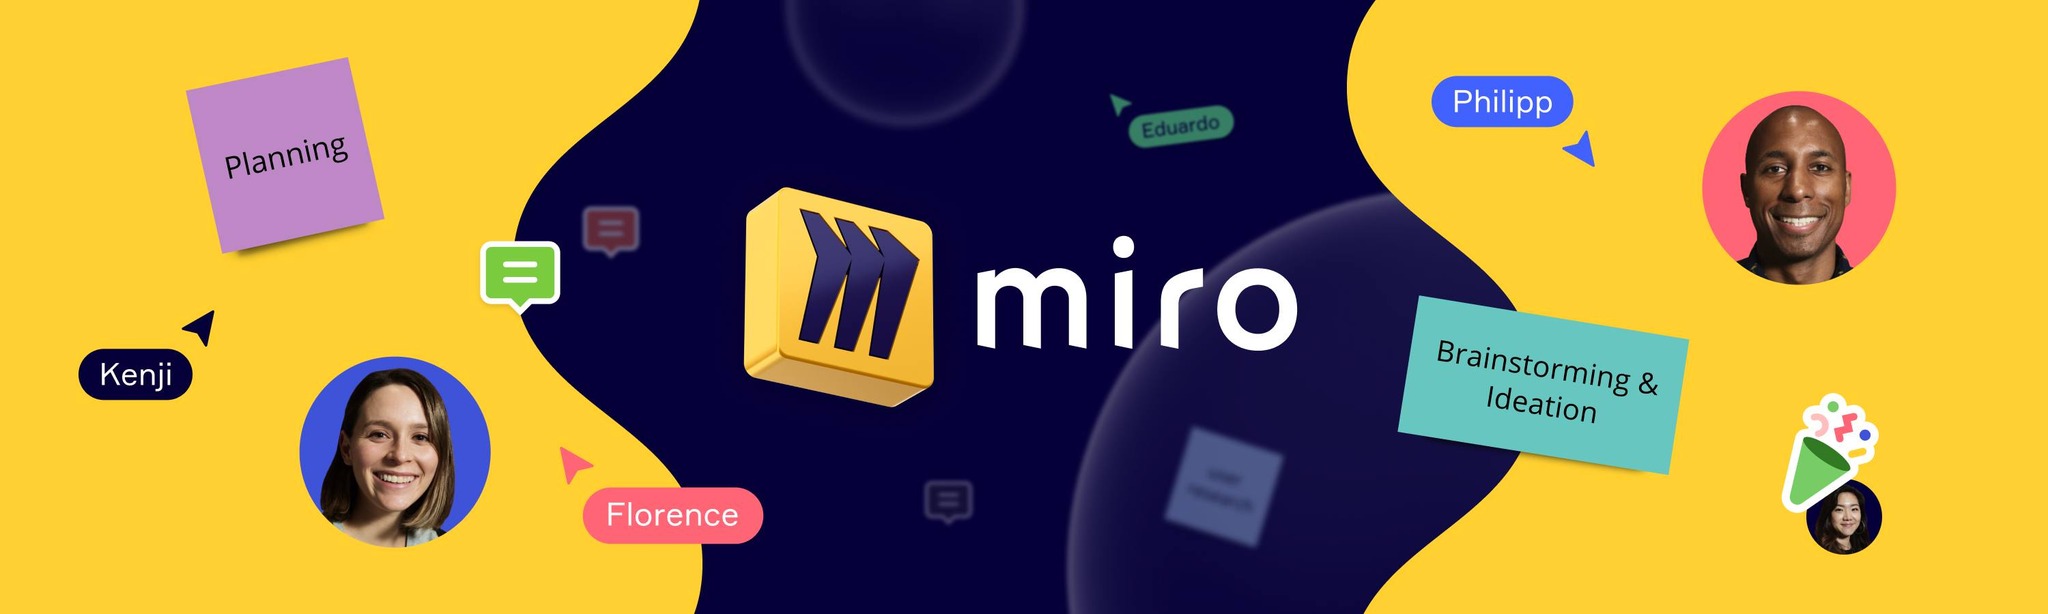 Miro on SideQuest - Oculus Quest Games & Apps including AppLab Games ...